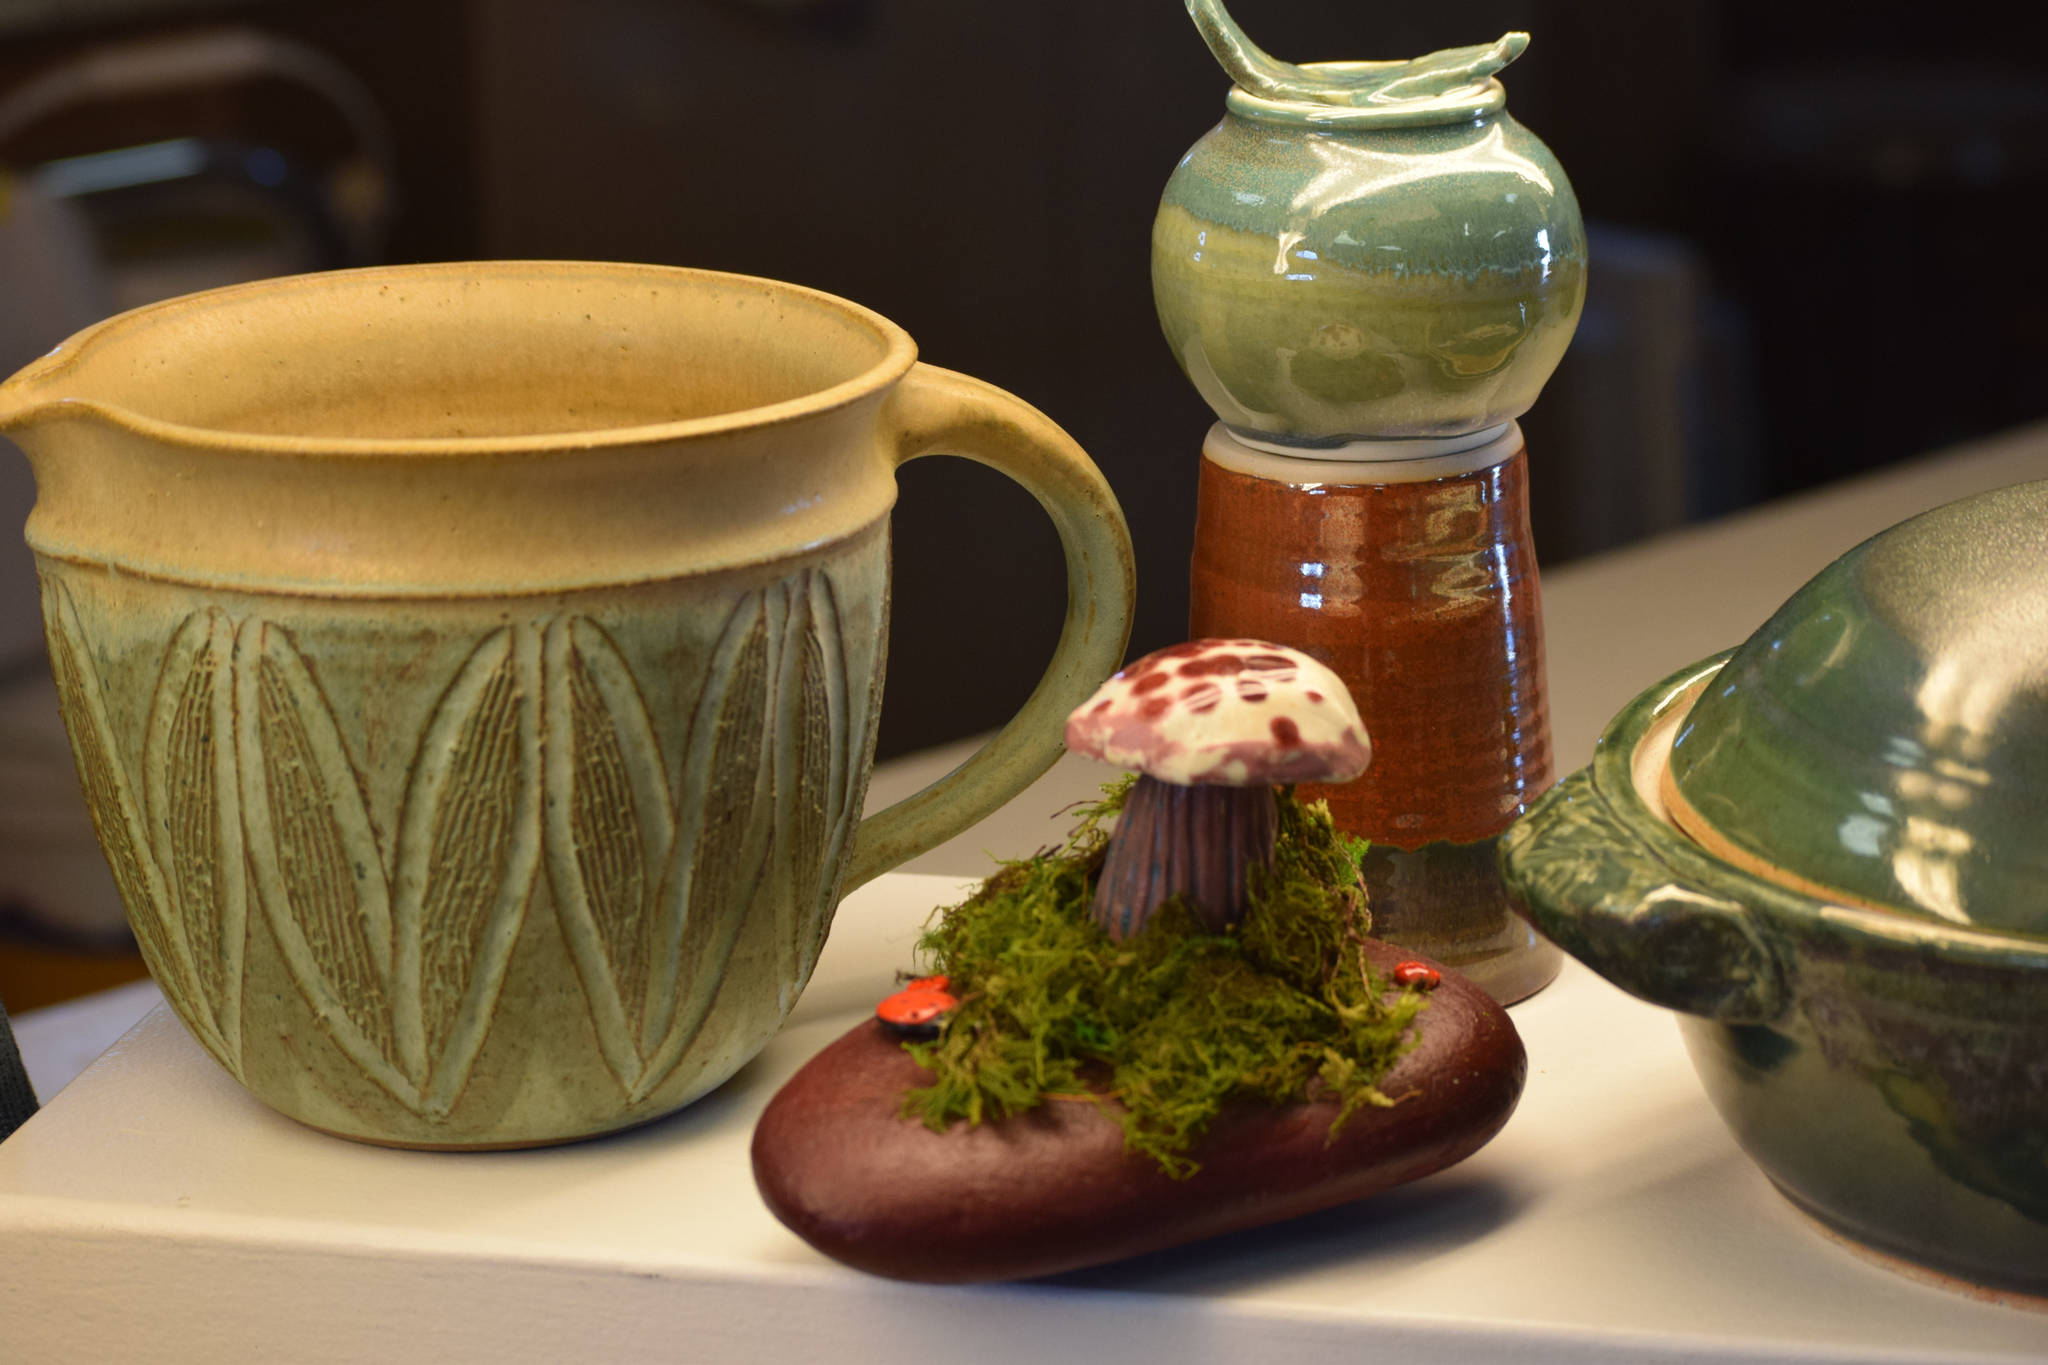 Handmade ceramics are on display at the Kenai Potters Guild on Tuesday, April 27, 2021. Camille Botello / Peninsula Clarion